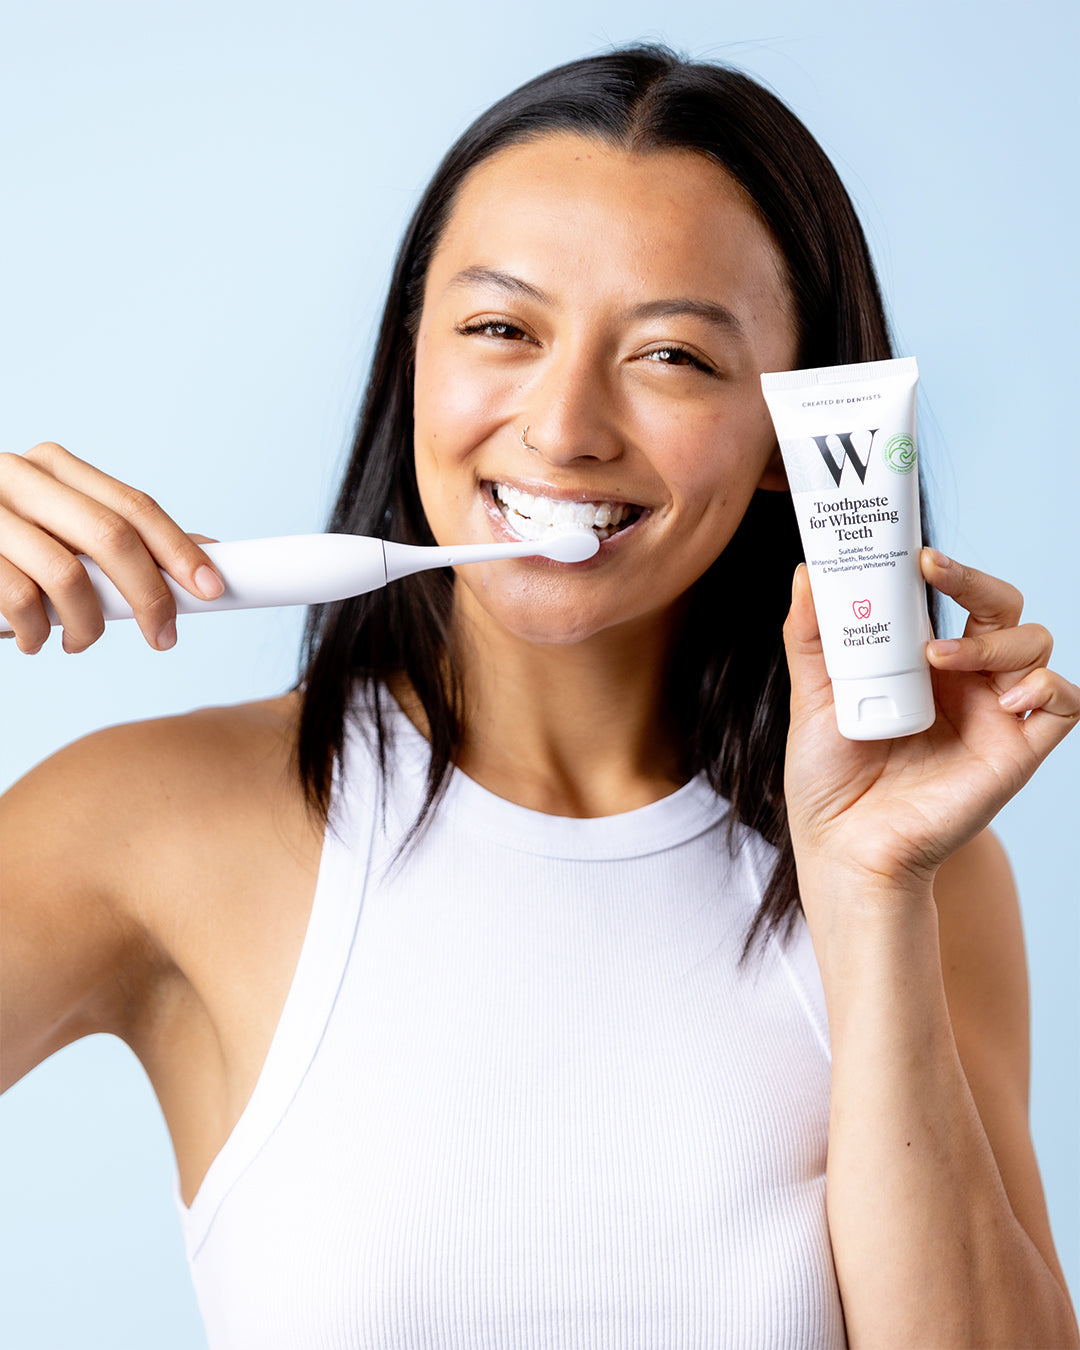 Toothpaste for Whitening Teeth